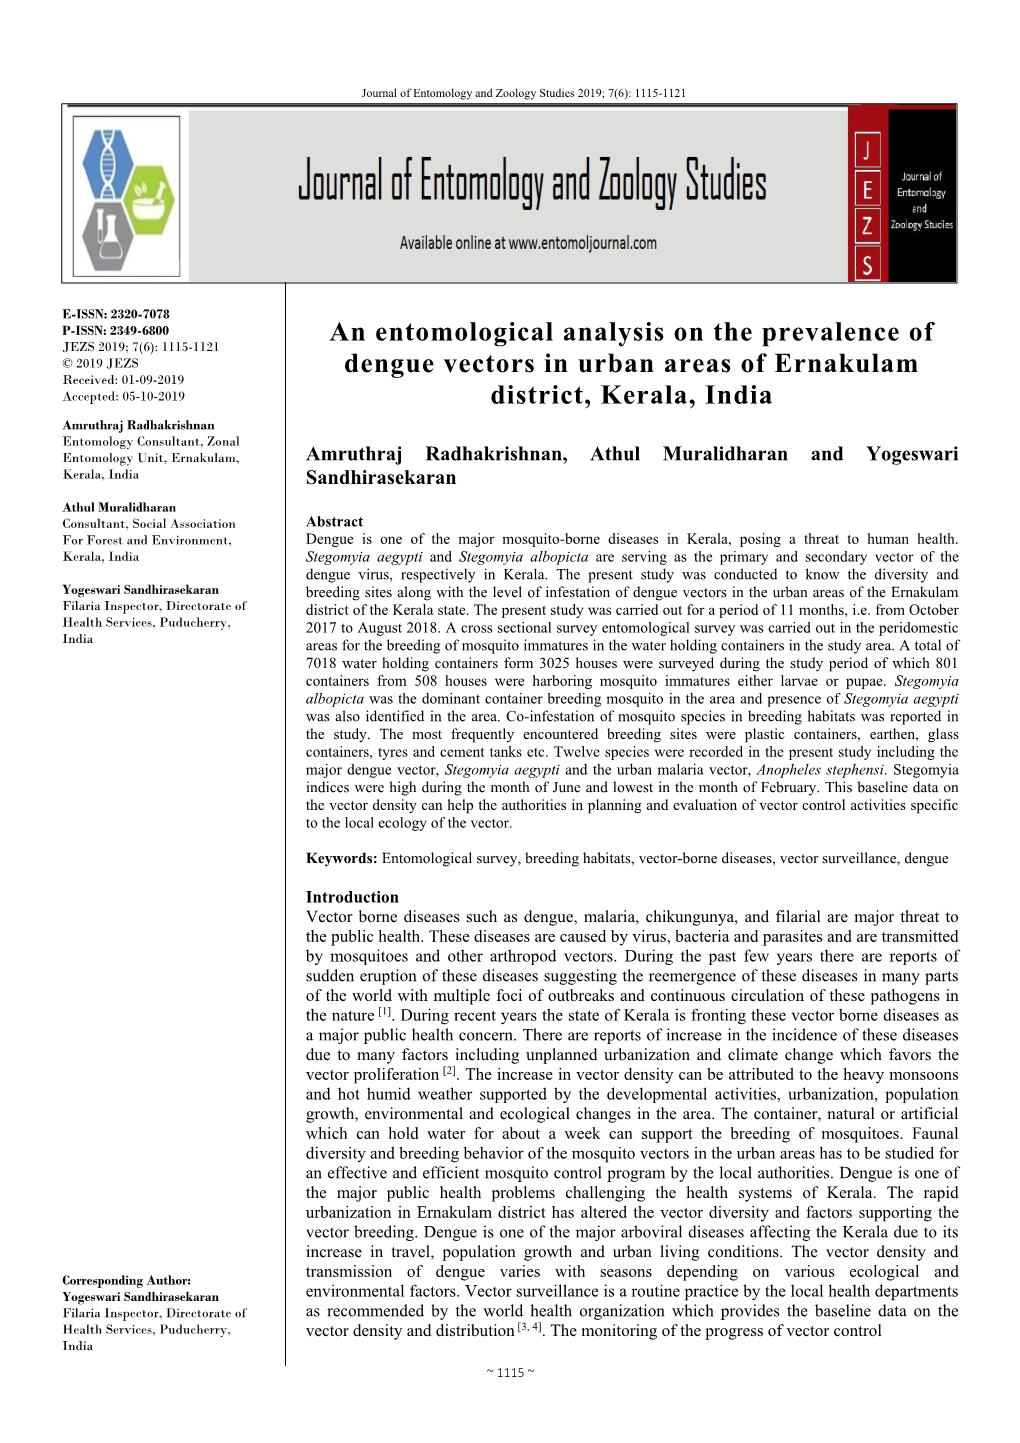 An Entomological Analysis on the Prevalence of Dengue Vectors In